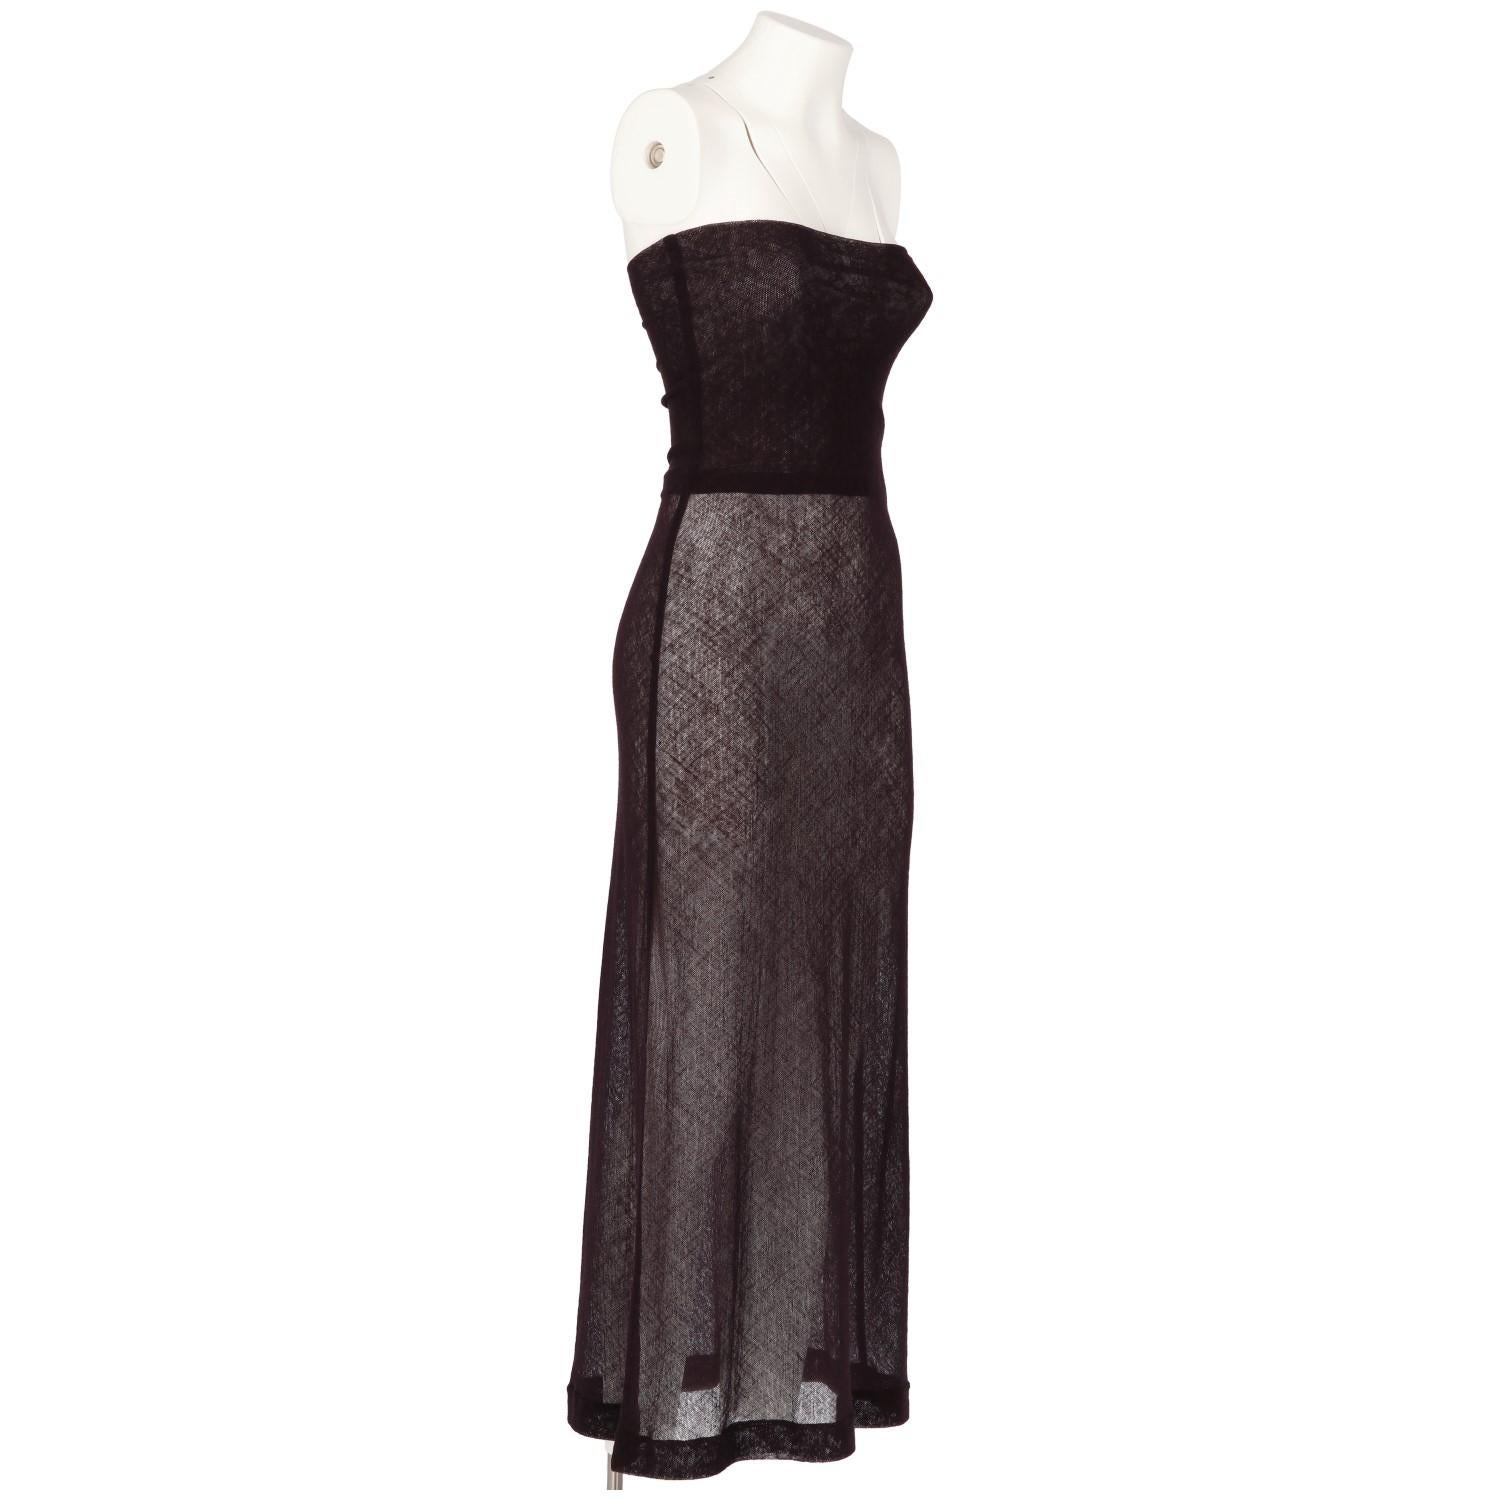 Dries Van Noten slight sleeveless dress in super subtle stretch-wool knit, see-through effect. It comes in a beautiful dark purple color, almost black. The item is in excellent conditions. 

Size: 38 EU

Height: 120
Bust: 35 cm
Waist: 30 cm